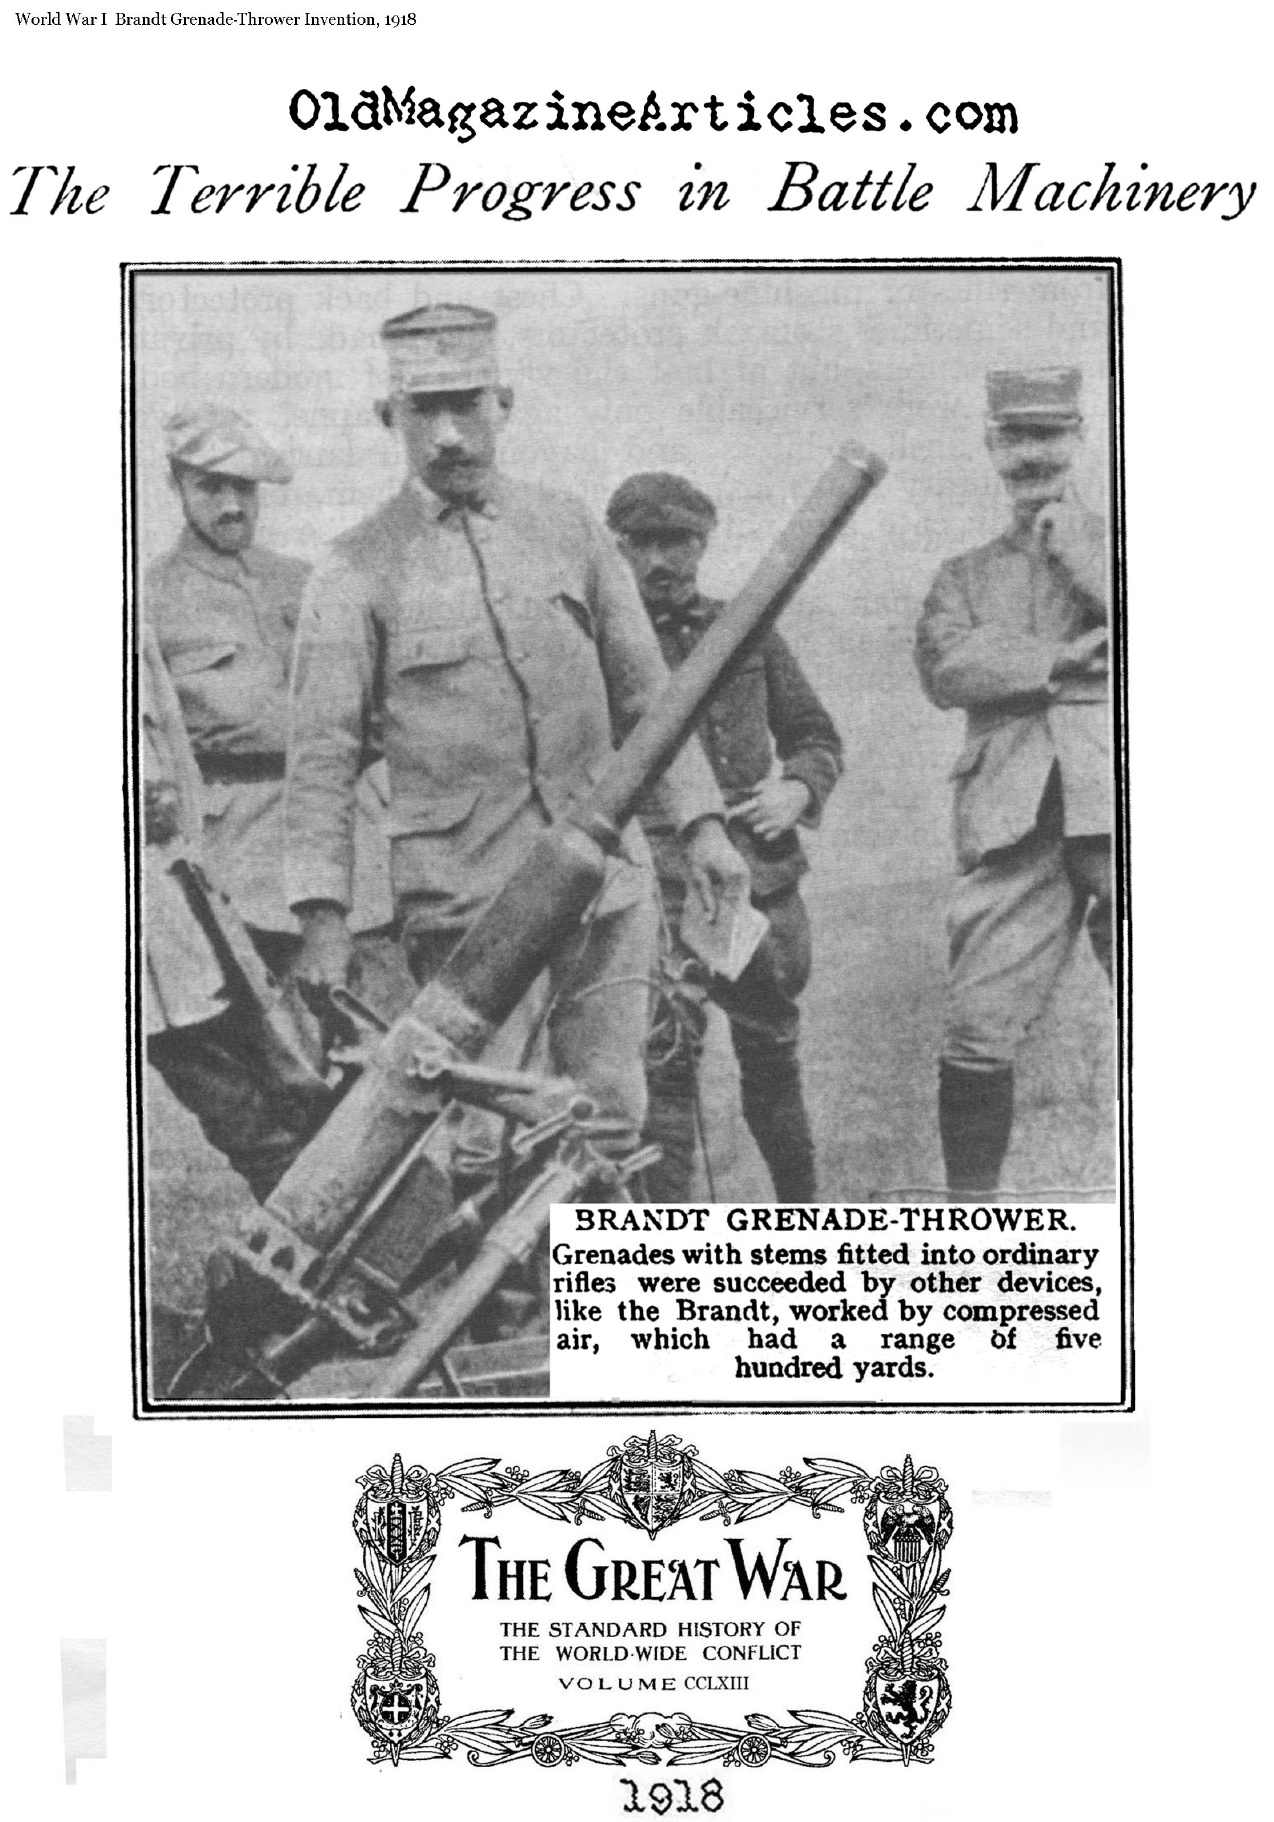 Trench Mortar (The Great War, 1918)